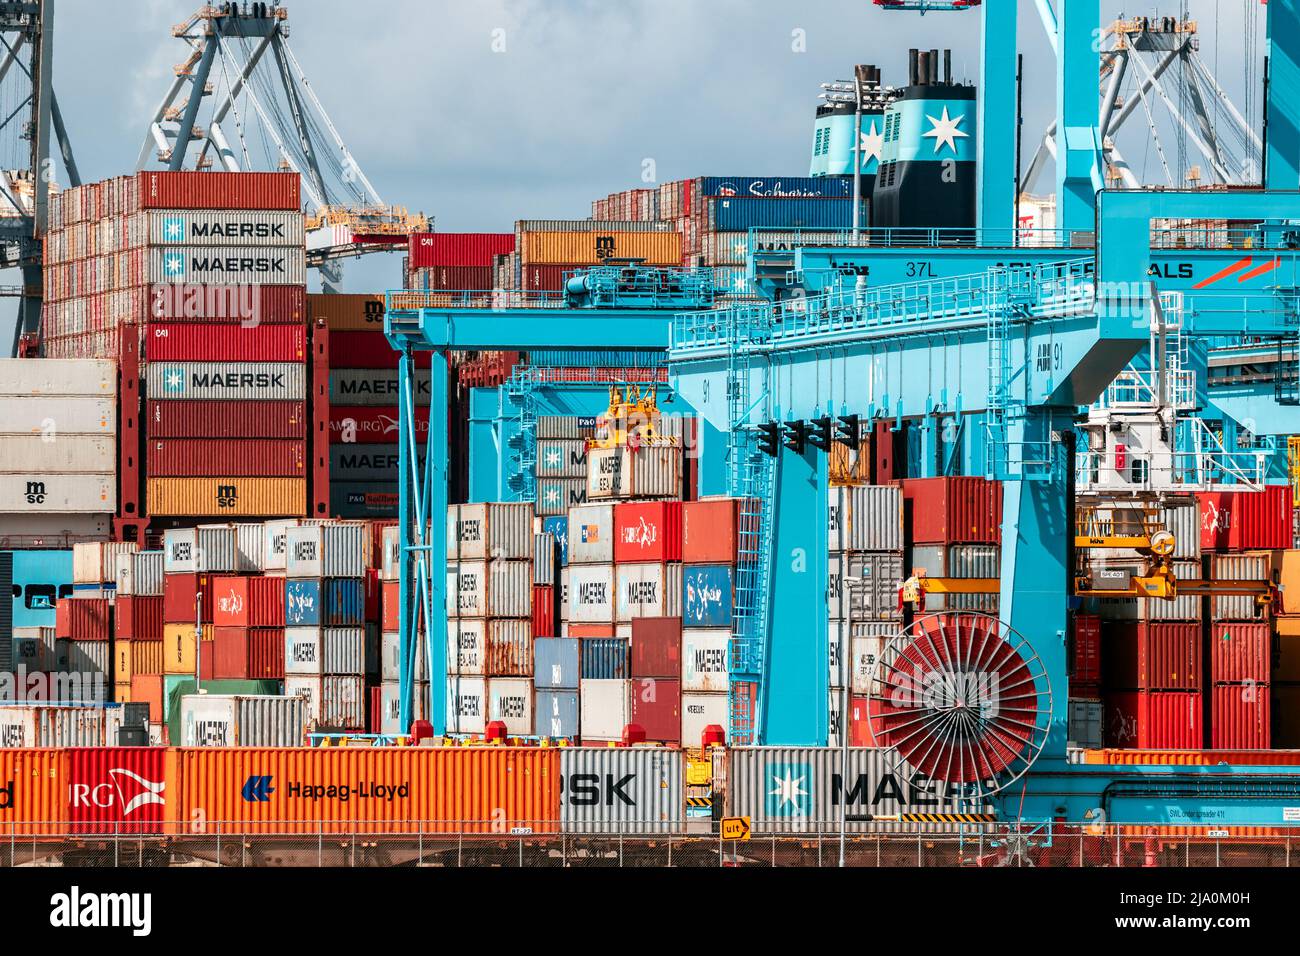 Shipping containers are moved in the APM Terminal in the new Maasvlakte 2 in the Port of Rotterdam. The Netherlands - September 8, 2019 Stock Photo